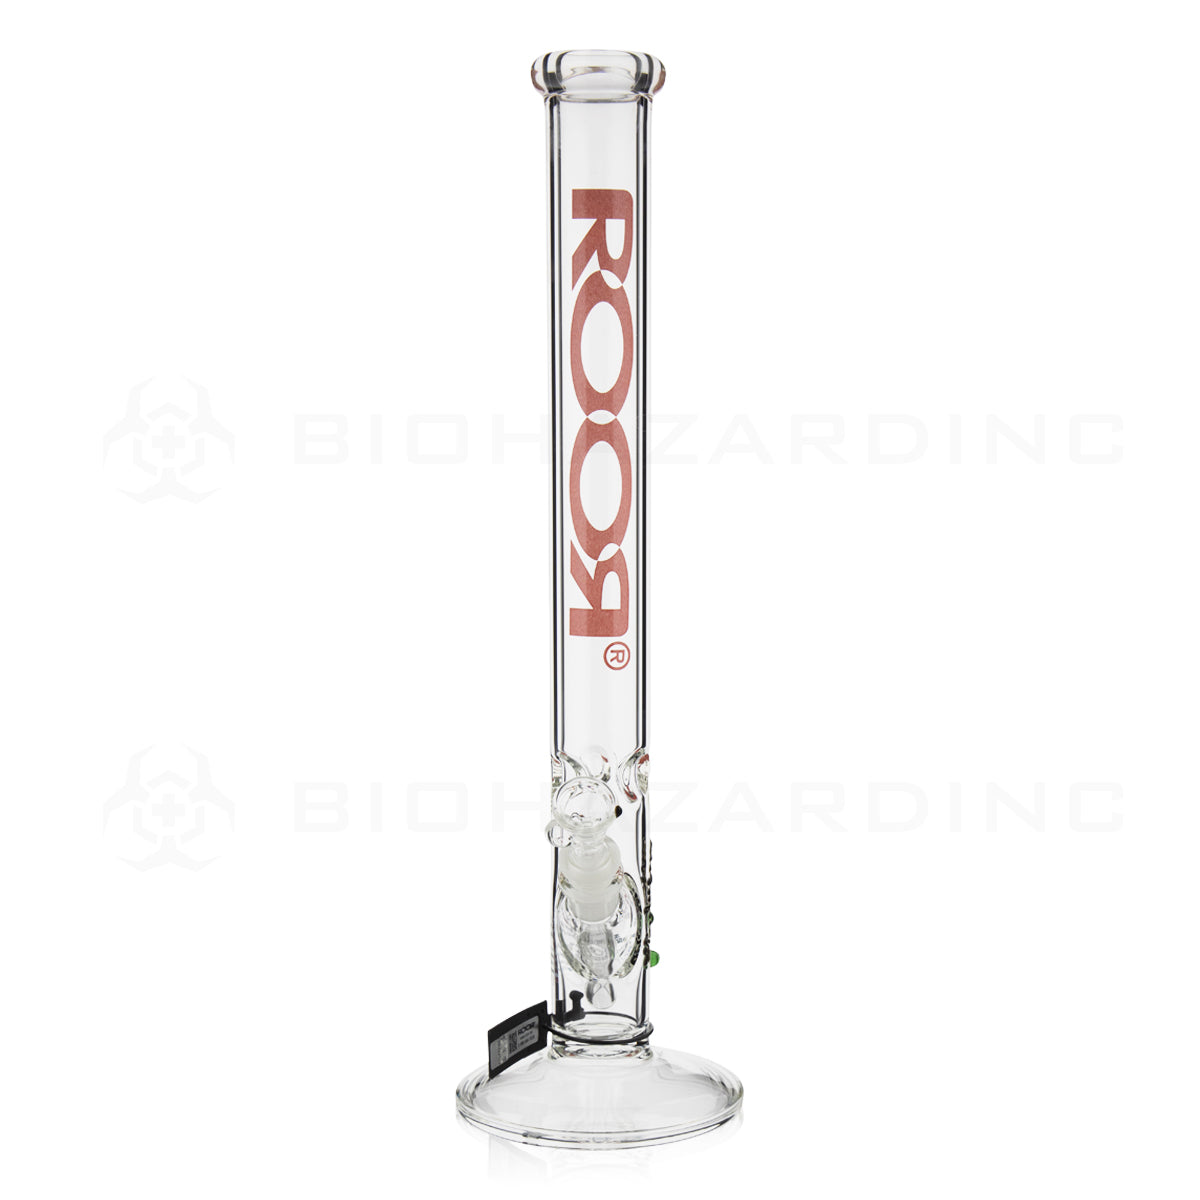 RooR® | 45mm x 5mm Straight Water Pipe | 18" - 14mm - Red Logo Glass Bong Roor   